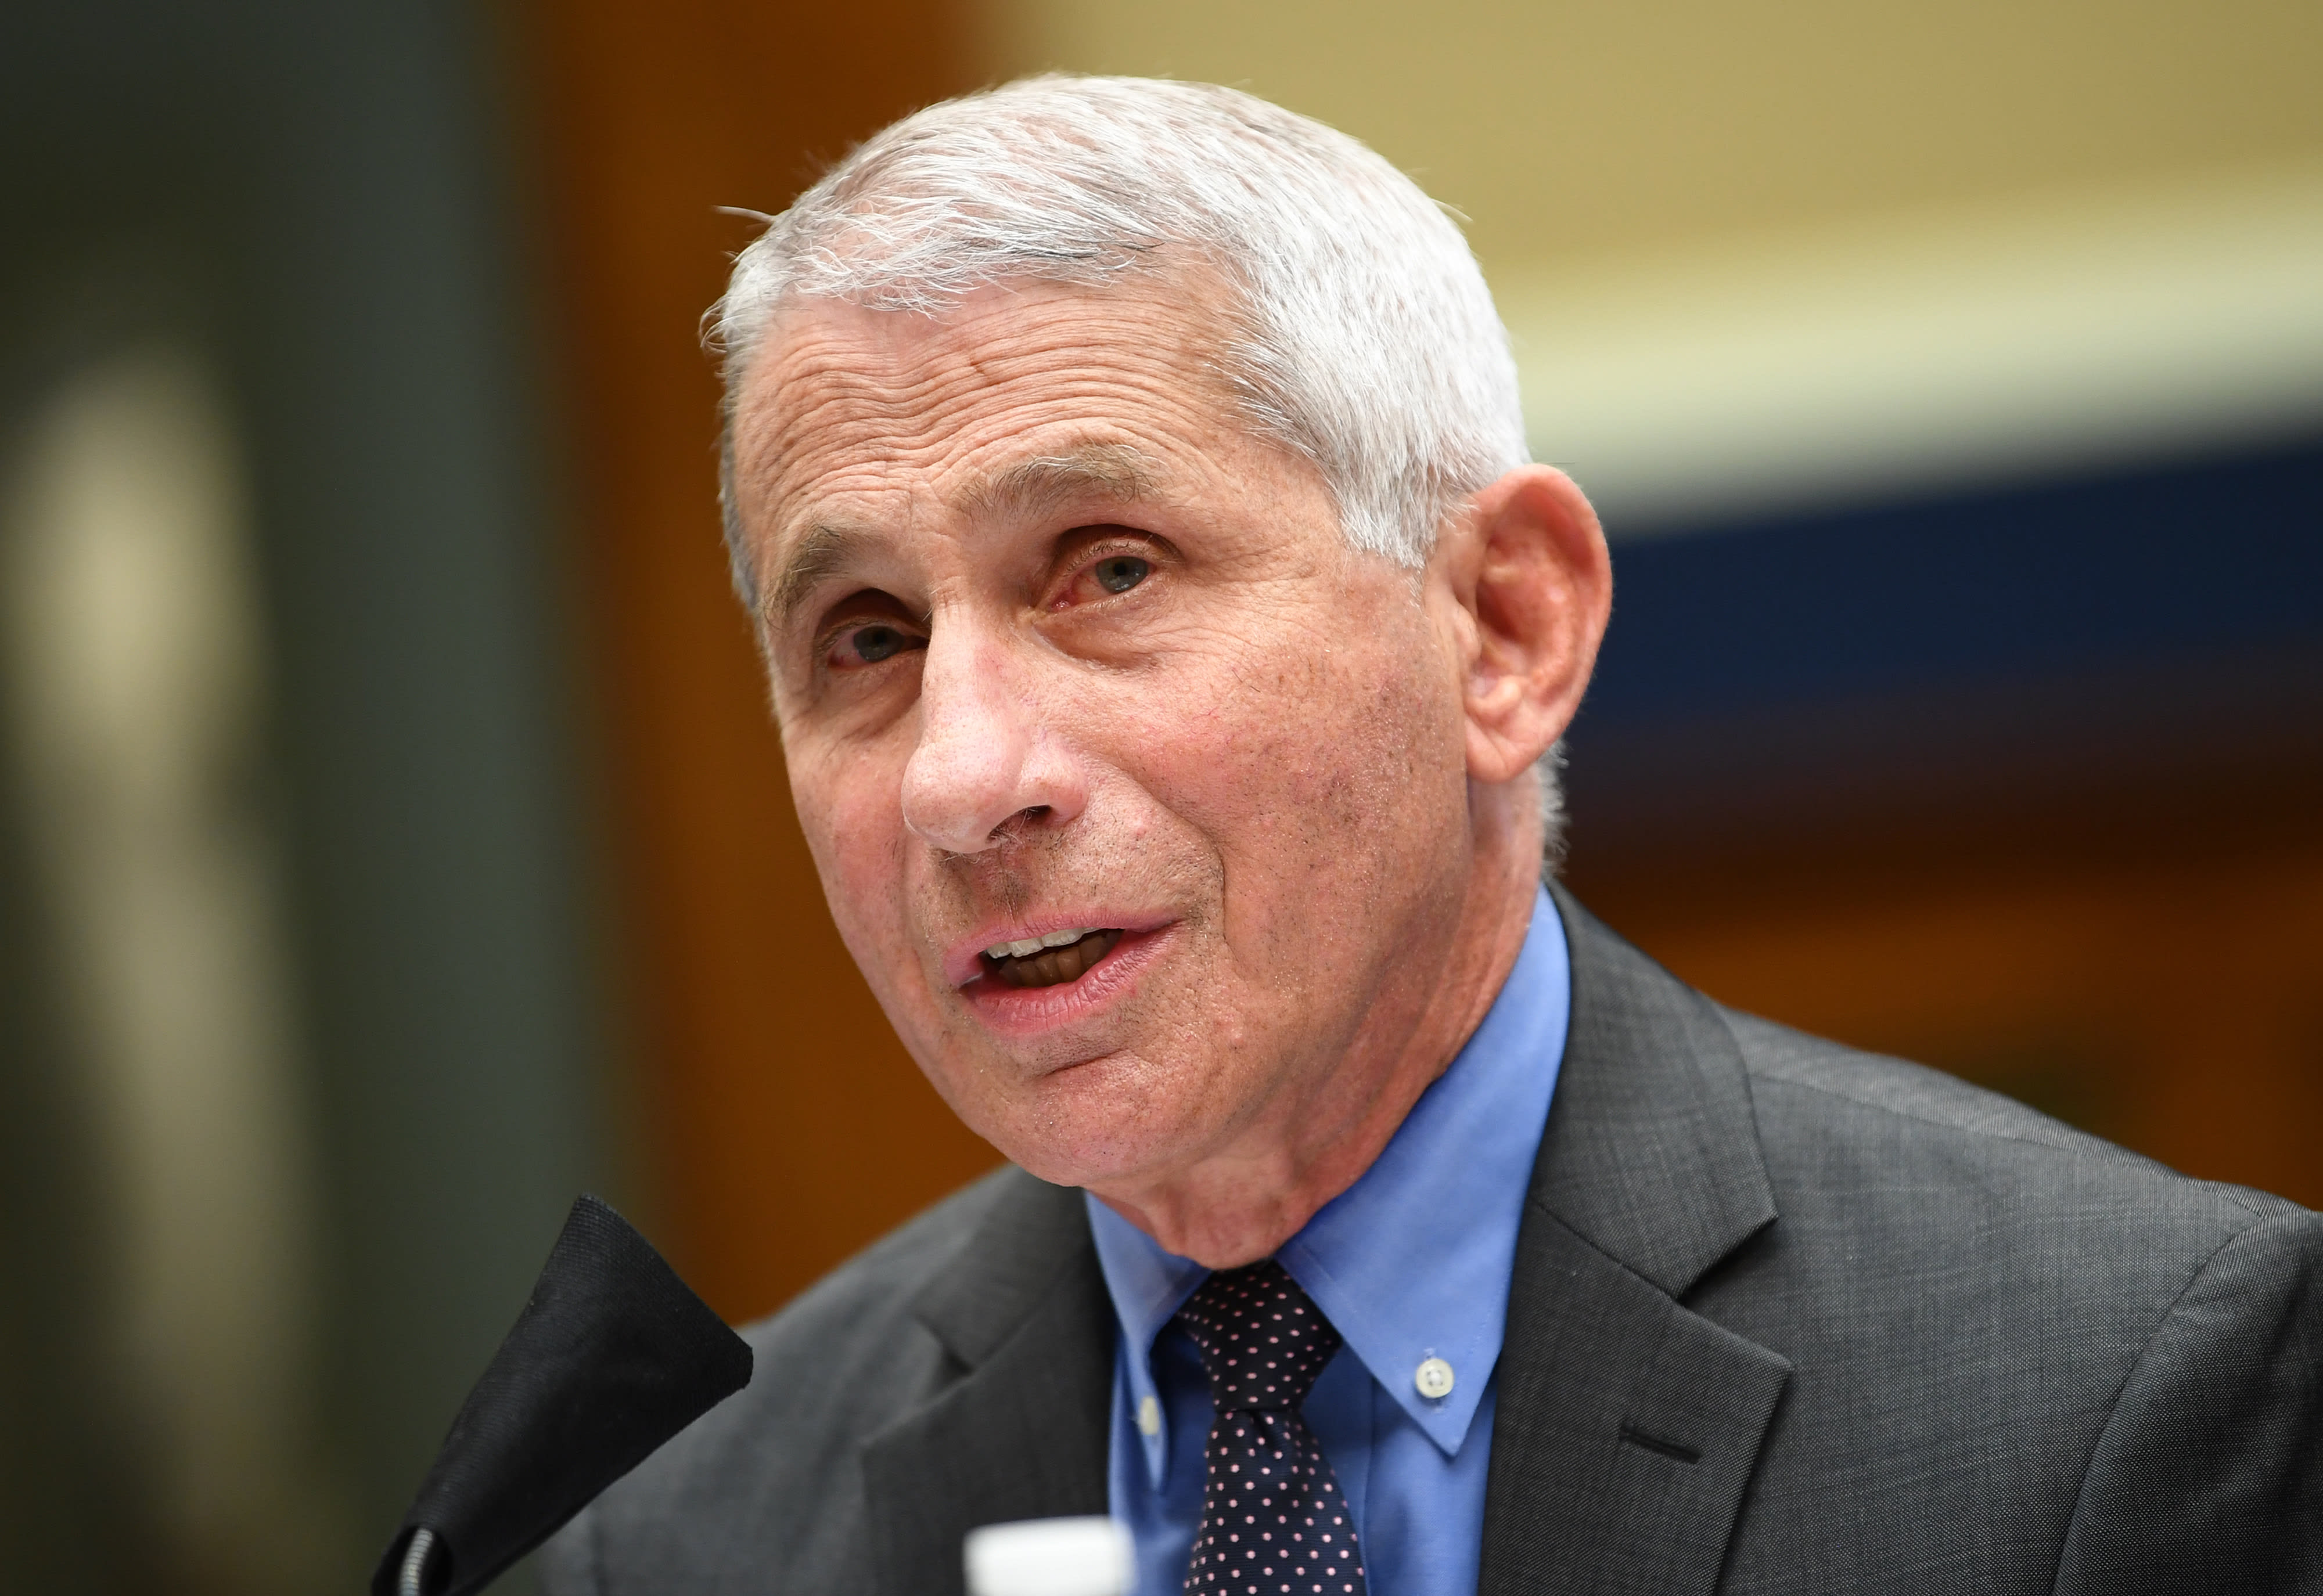 Dr. Anthony Fauci pleads with young people: 'you're propagating the pandemic'